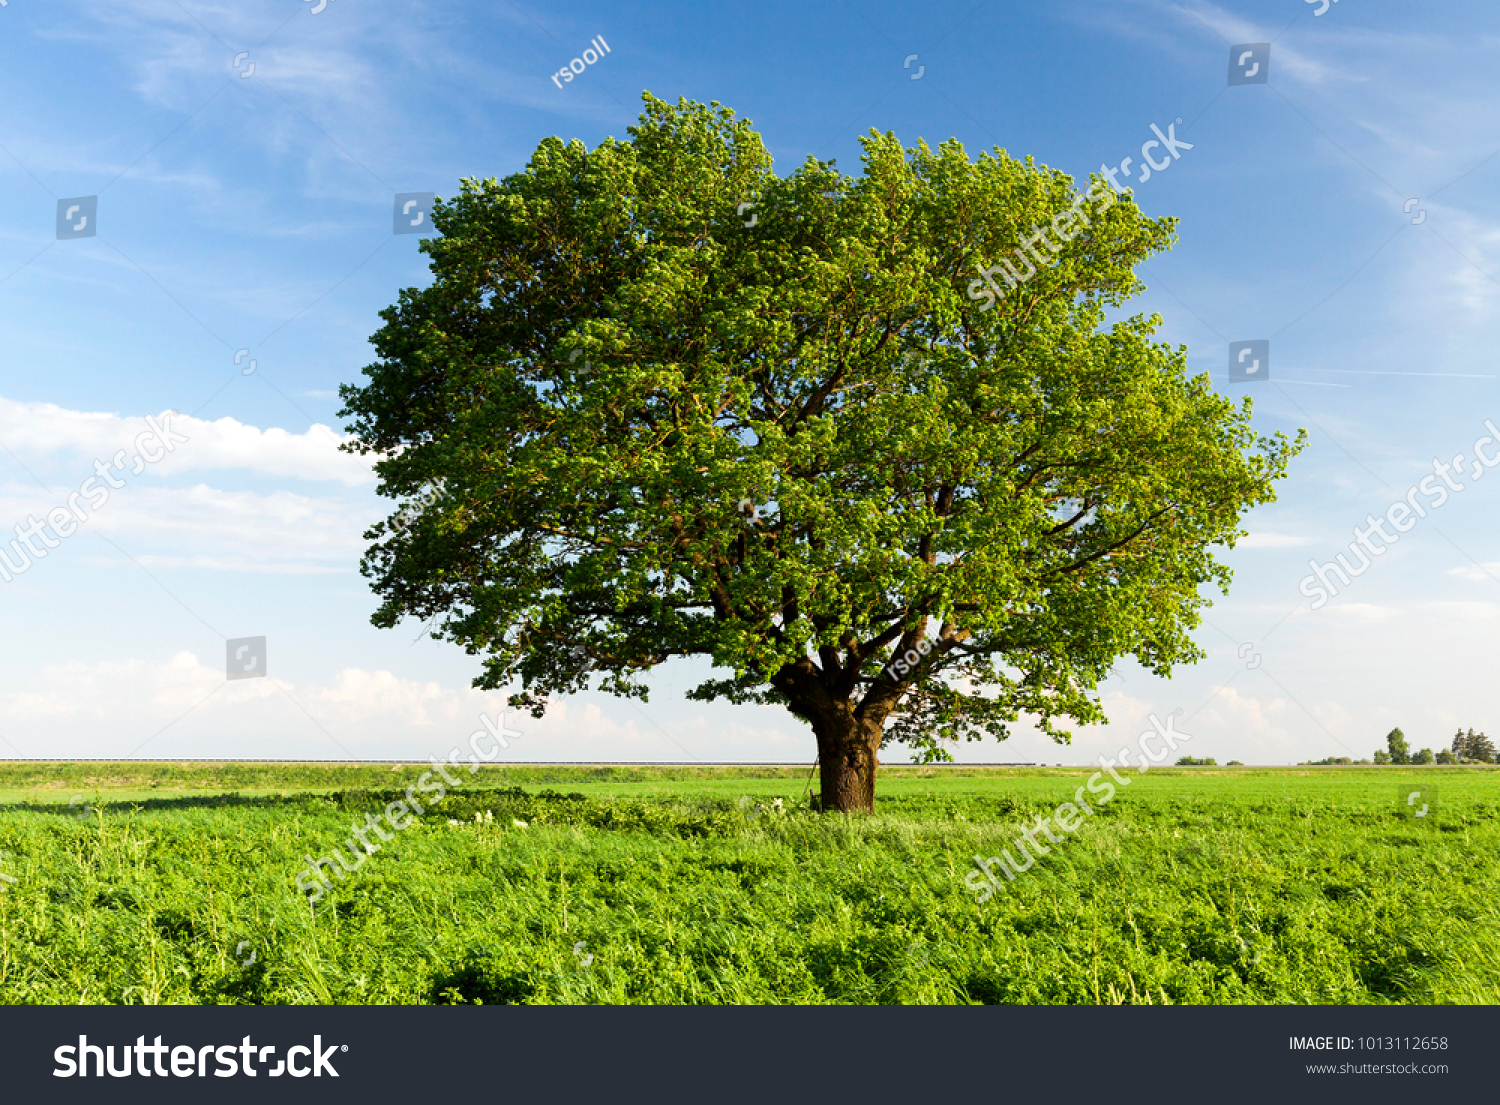 a field on which grows one beautiful tall oak tree, a summer landscape in sunny warm weather #1013112658